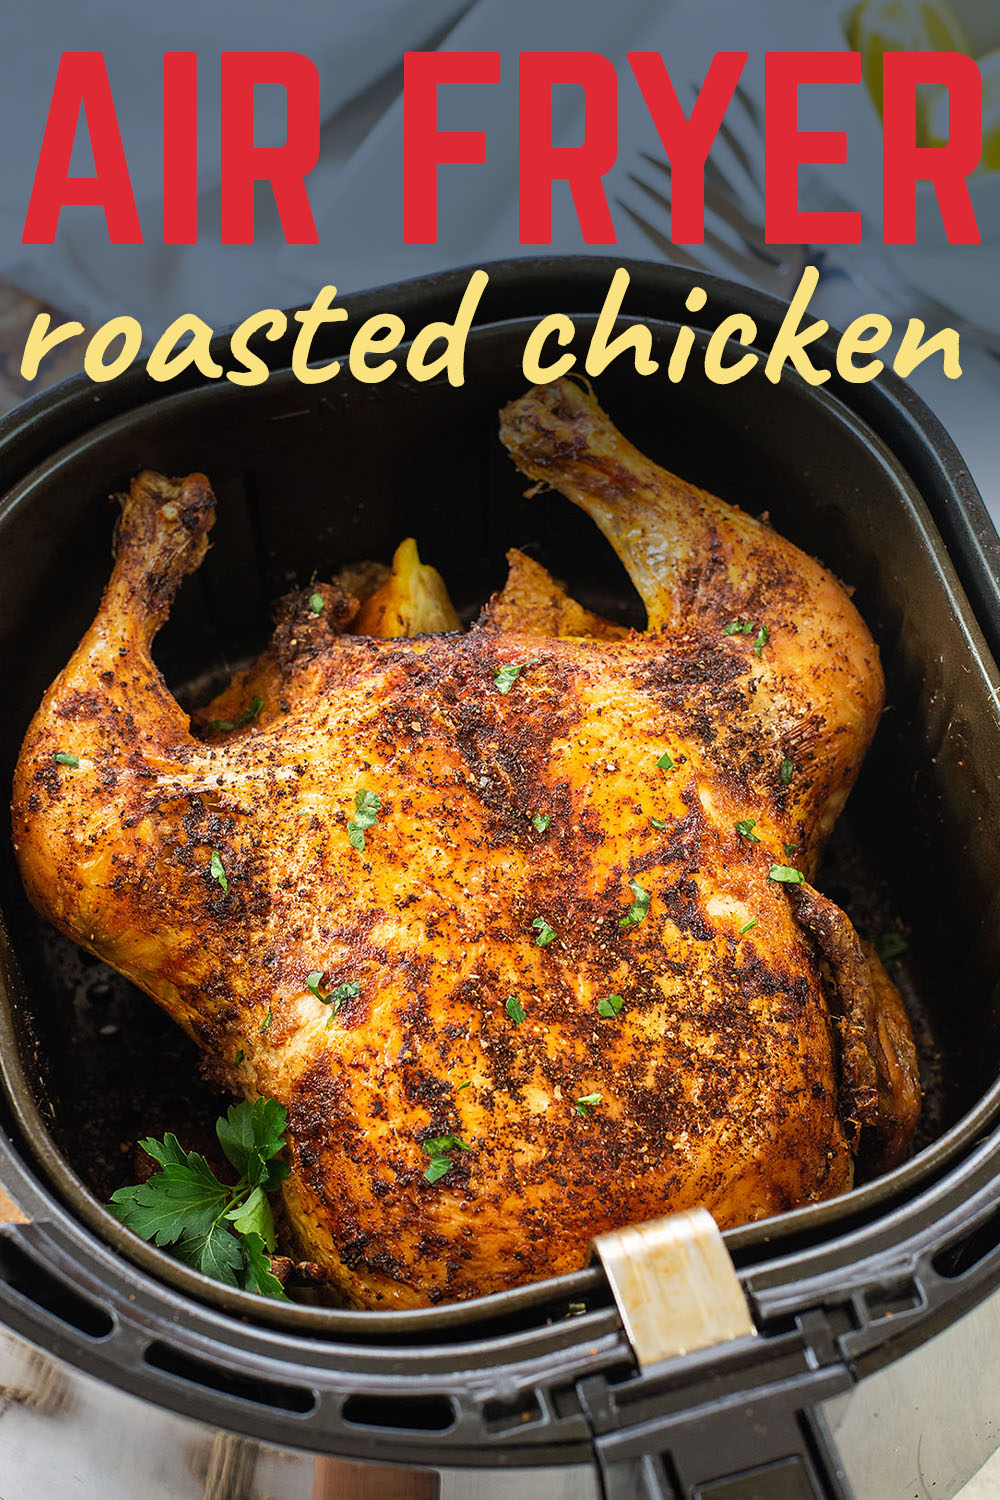 Moist, tender chicken in the air fryer! This whole chicken roasts perfectly in just one hour!